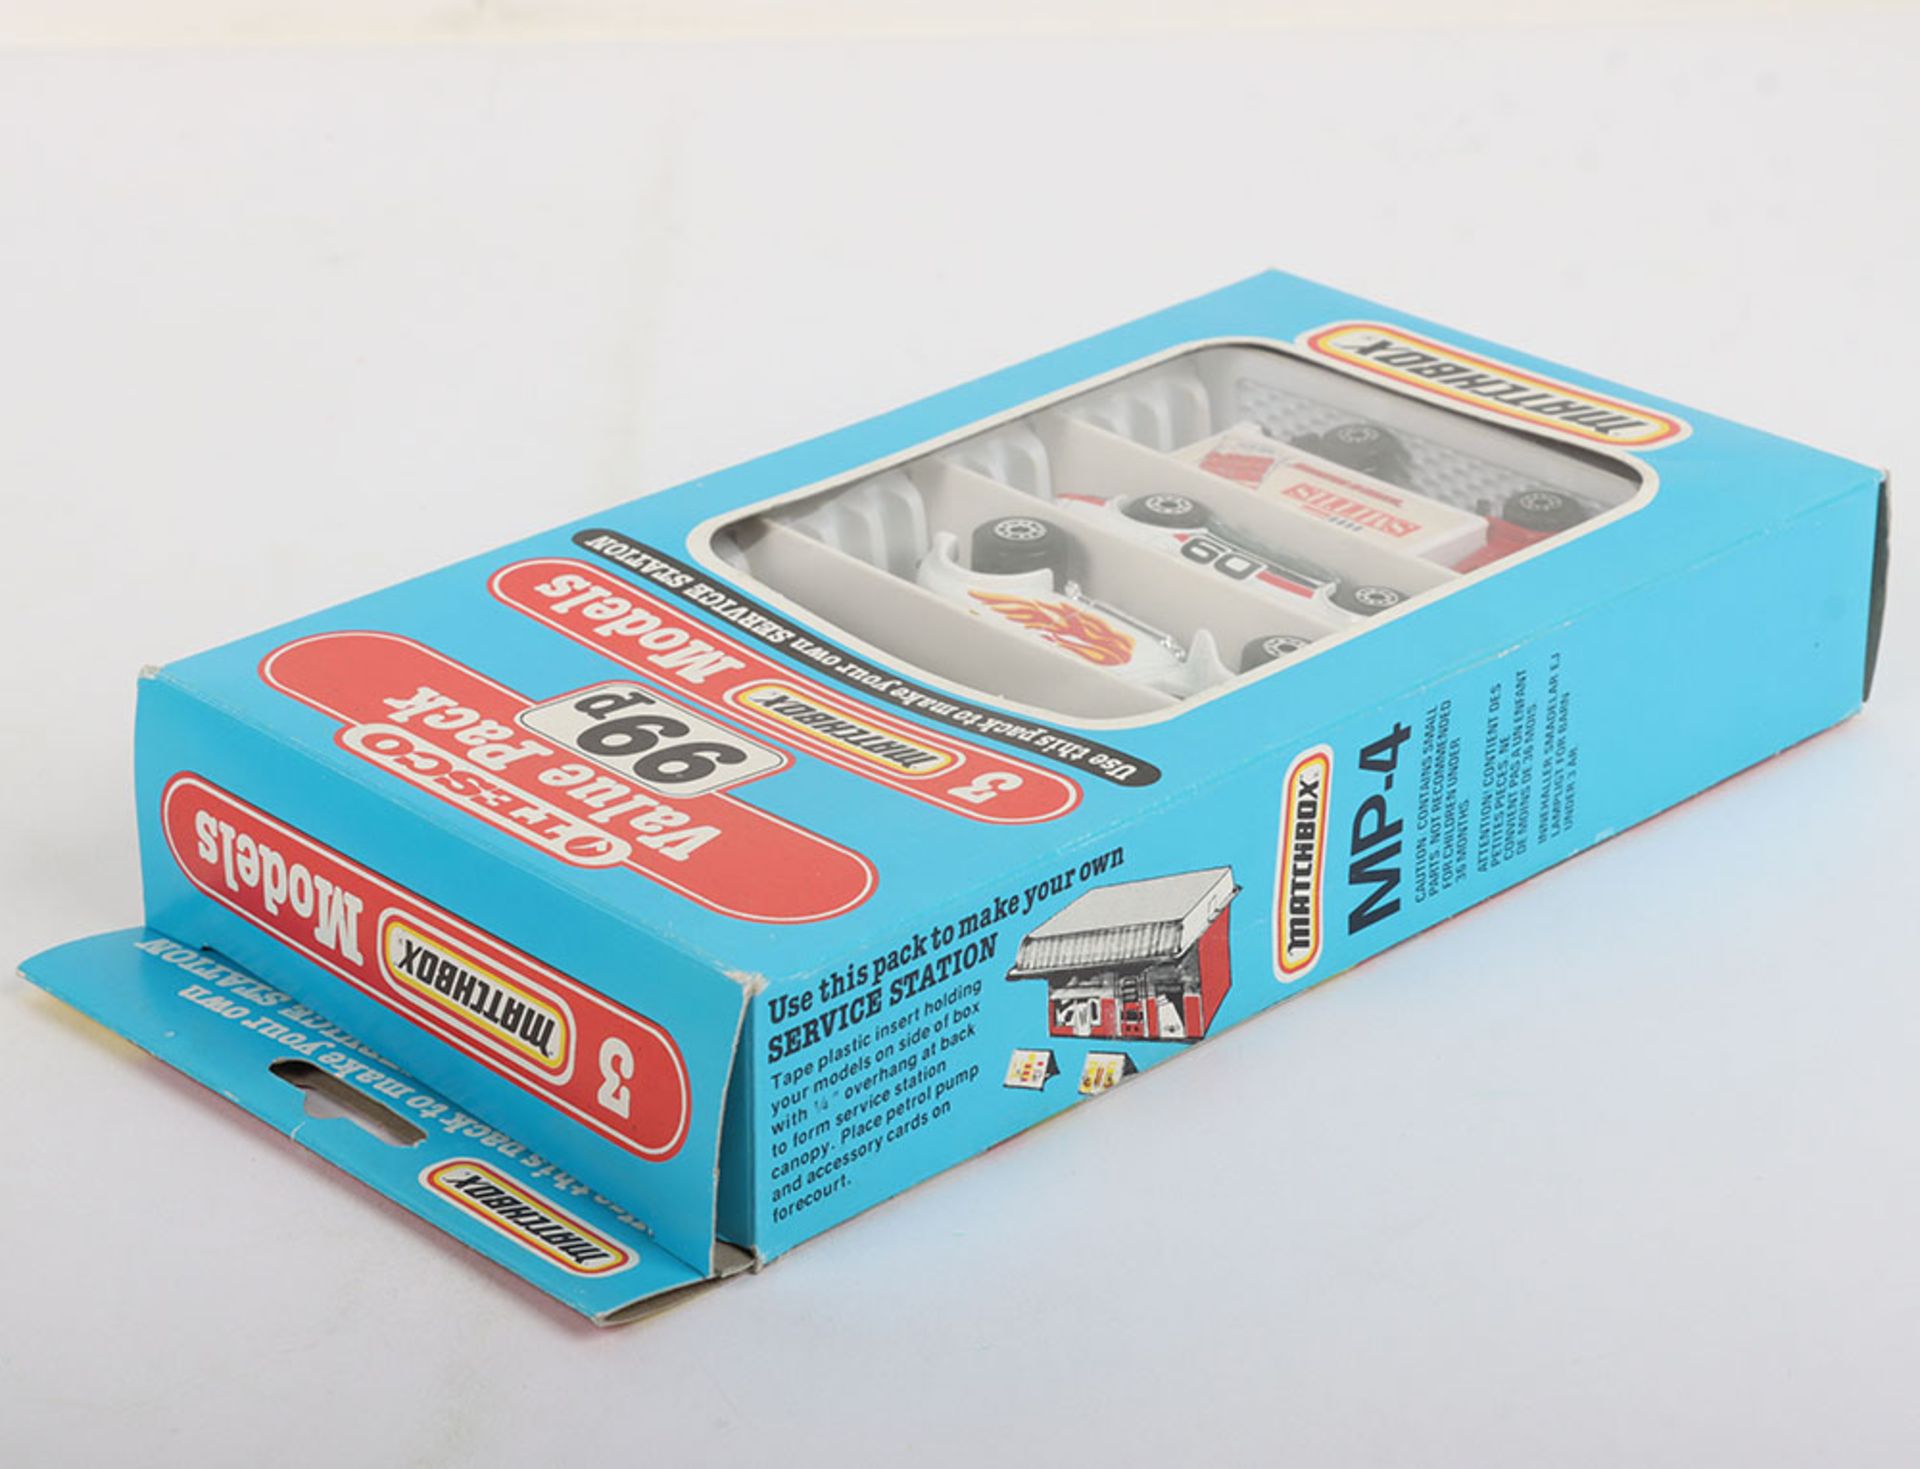 Matchbox Superfast MP-4 Tesco Value Pack of Three Models - Image 5 of 6